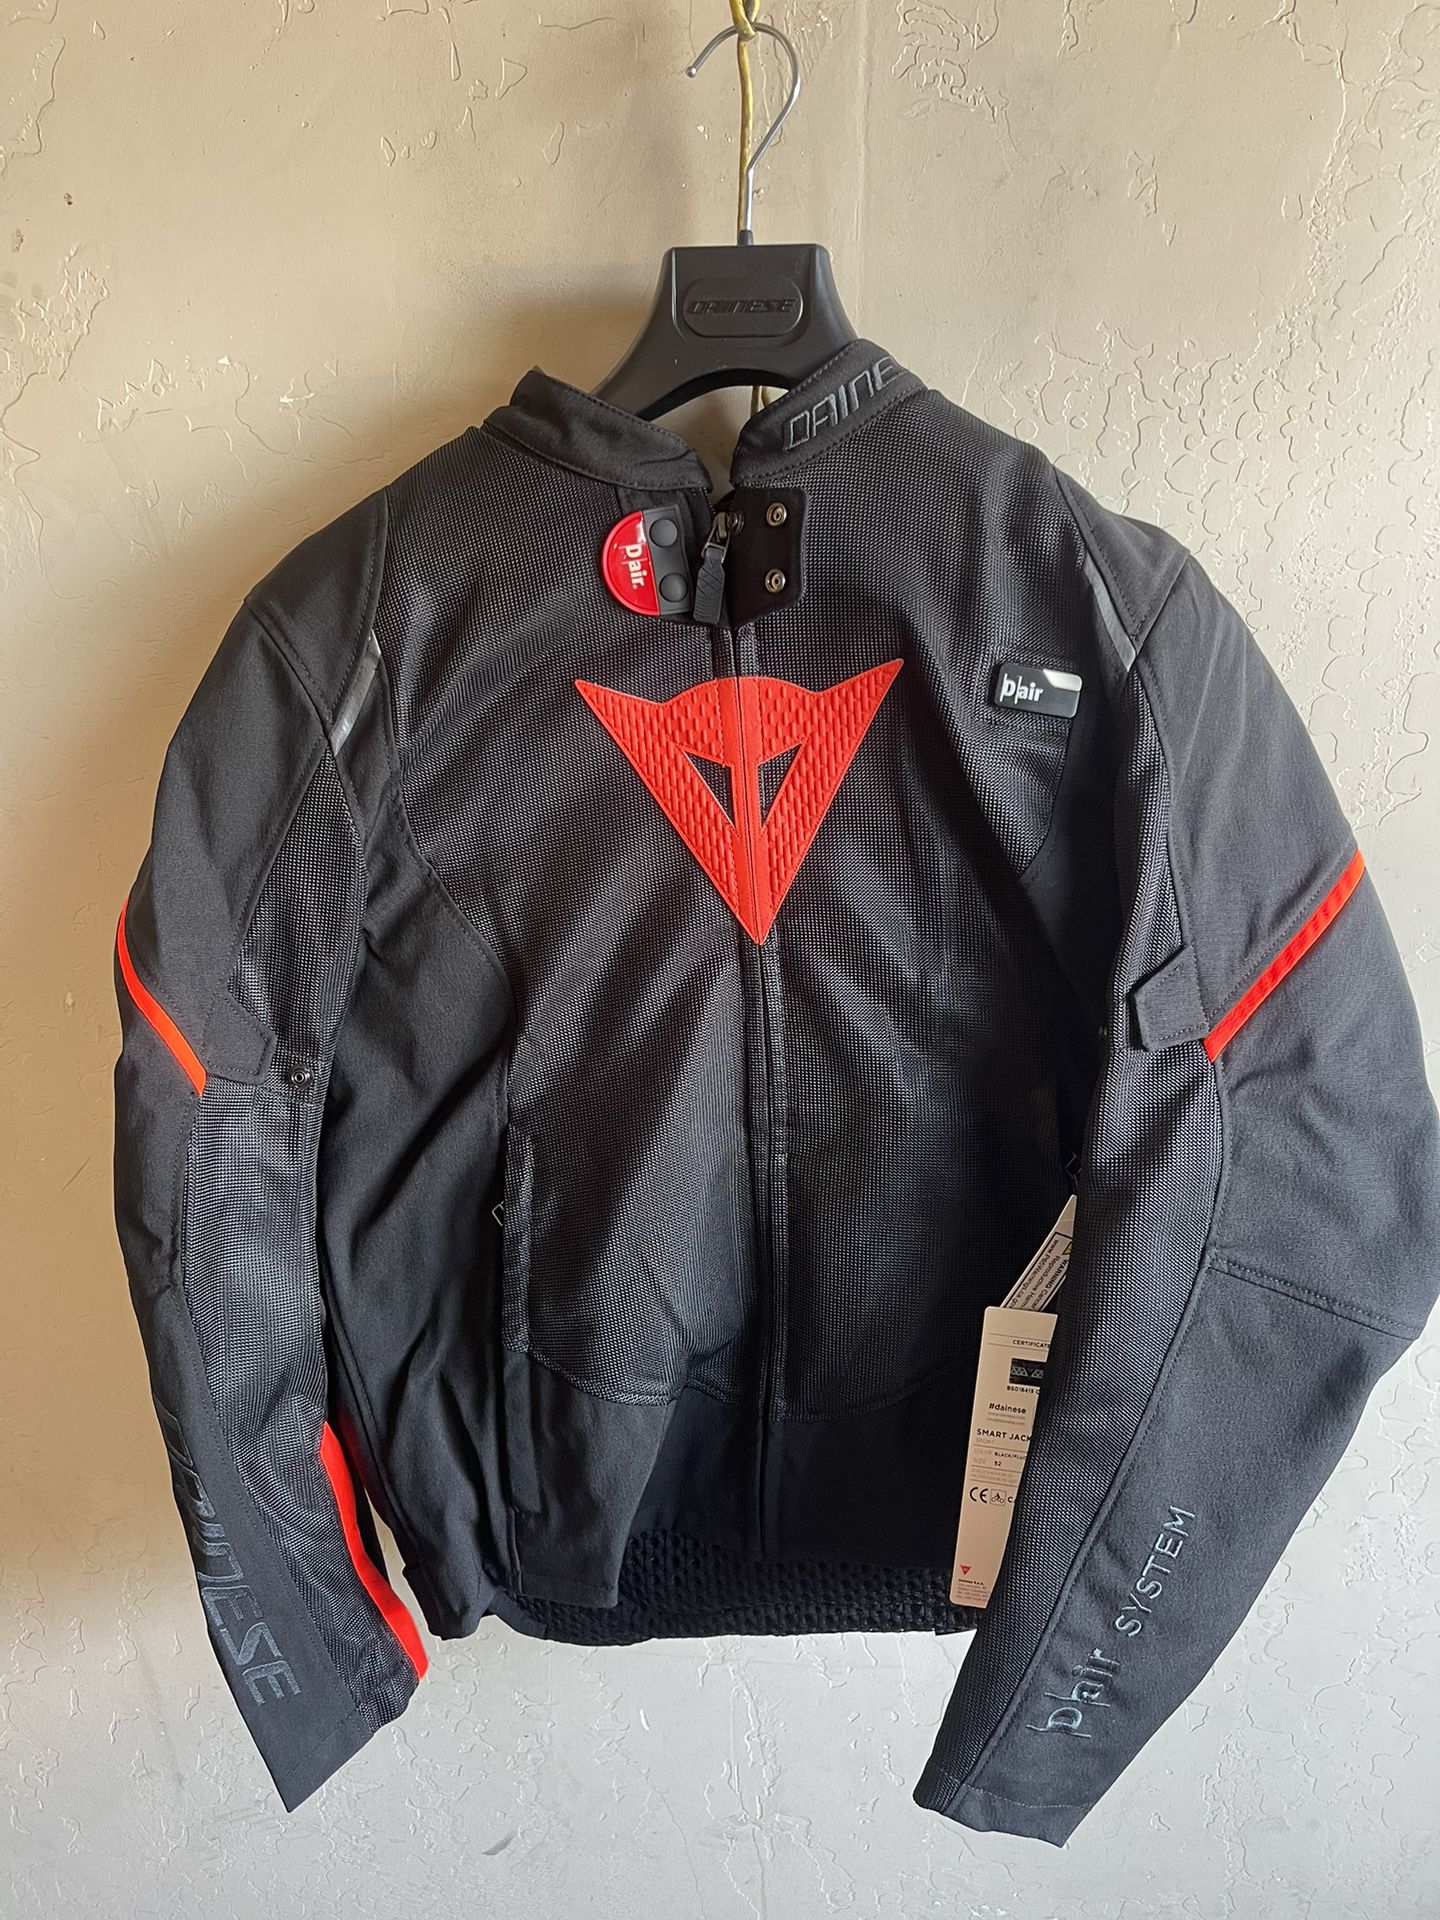 Dainese Smart LS Sport Jacket Black/Red Brand New! w/ tags SIZE 50/52